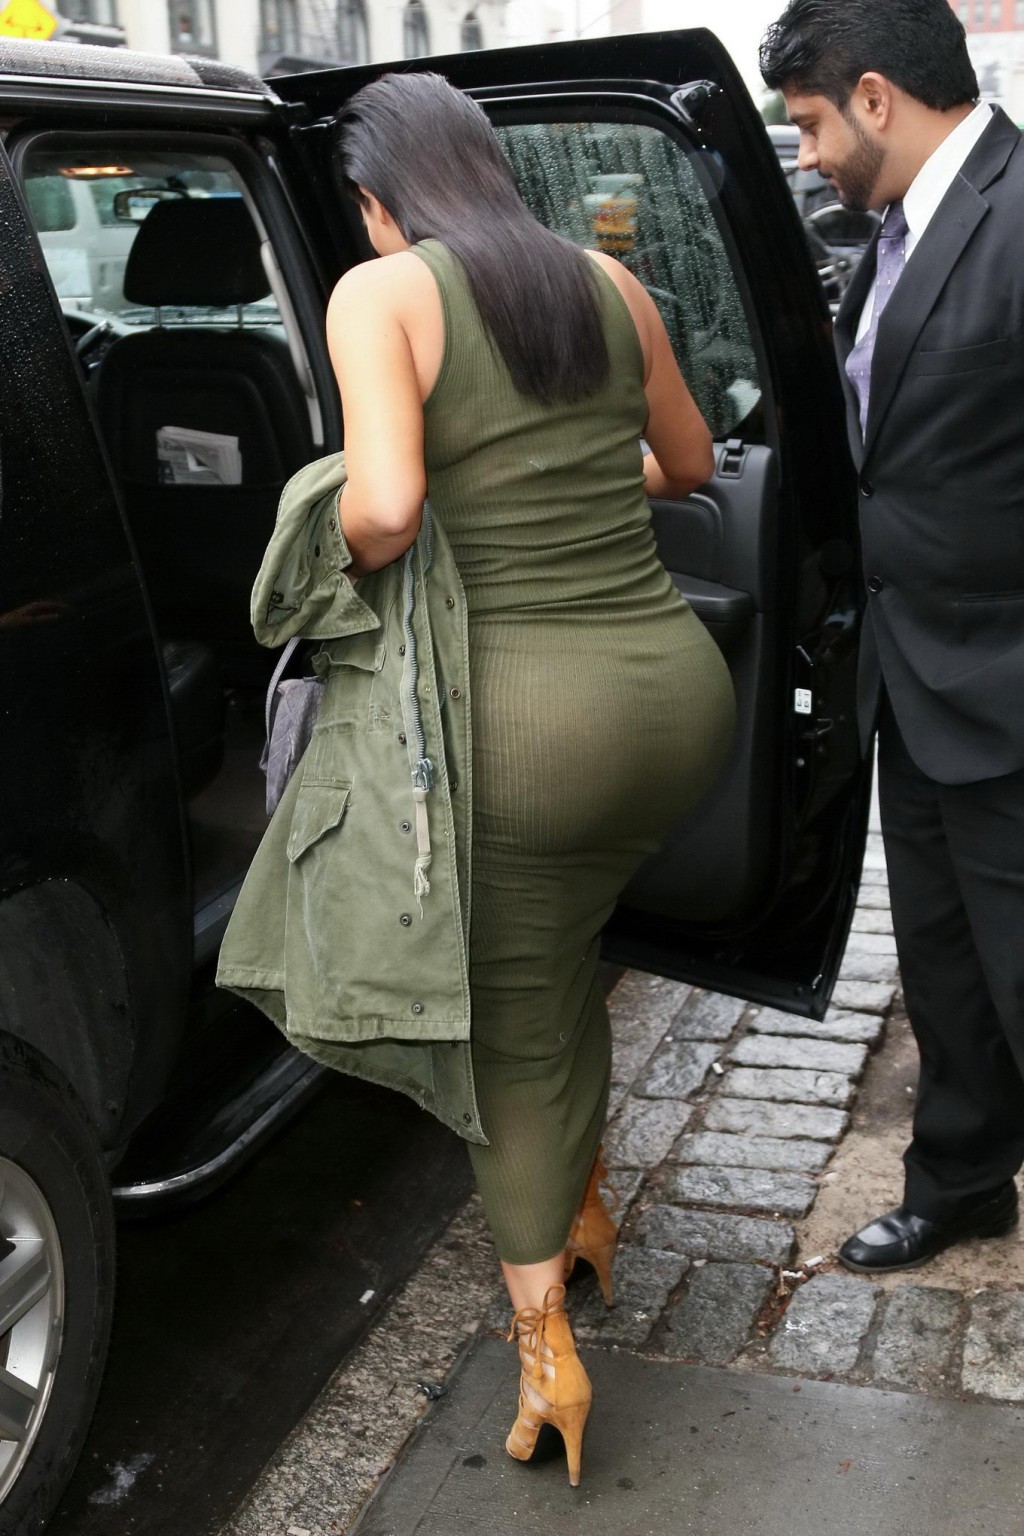 Kim Kardashian pantyless shows off her ass wearing a see through dress out in NY #75162182